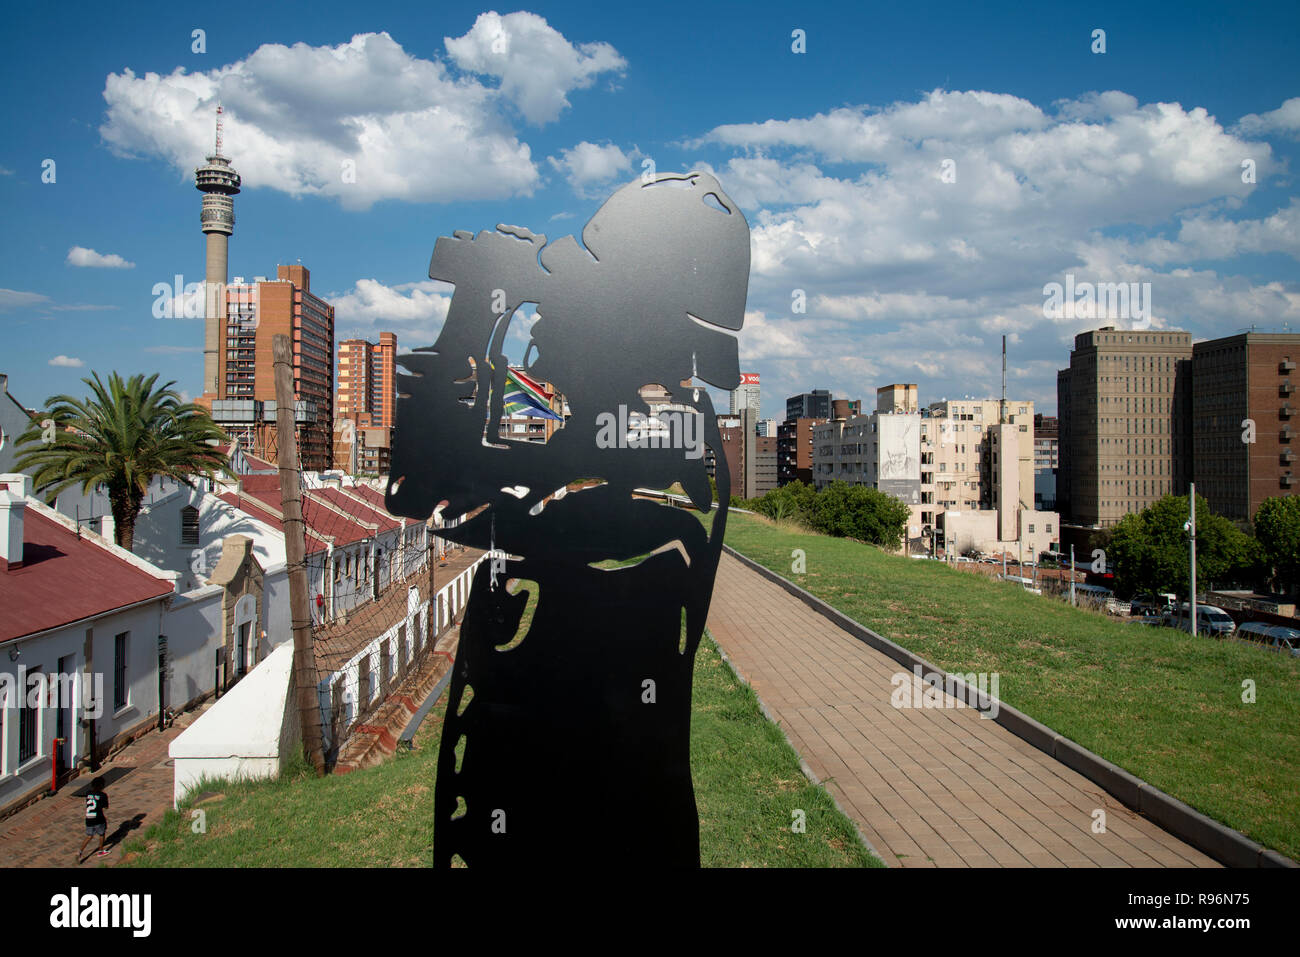 Johannesburg, South Africa, 19 December, 2018. A silhouetted figure keeps guard over the Old Fort on Constitution Hill, as part of a new permanent exhibition there. Using technology such as holograms, the new exhibition additions officially opened in December, telling the stories about prisoners who were housed here, both during the gold rush and later during apartheid. During apartheid, The Old Fort housed white prisoners. Prison guards and soldiers also feature in the exhibition as the Old Fort was a military garrison during the Anglo-Boer War. Credit: Eva-Lotta Jansson Stock Photo